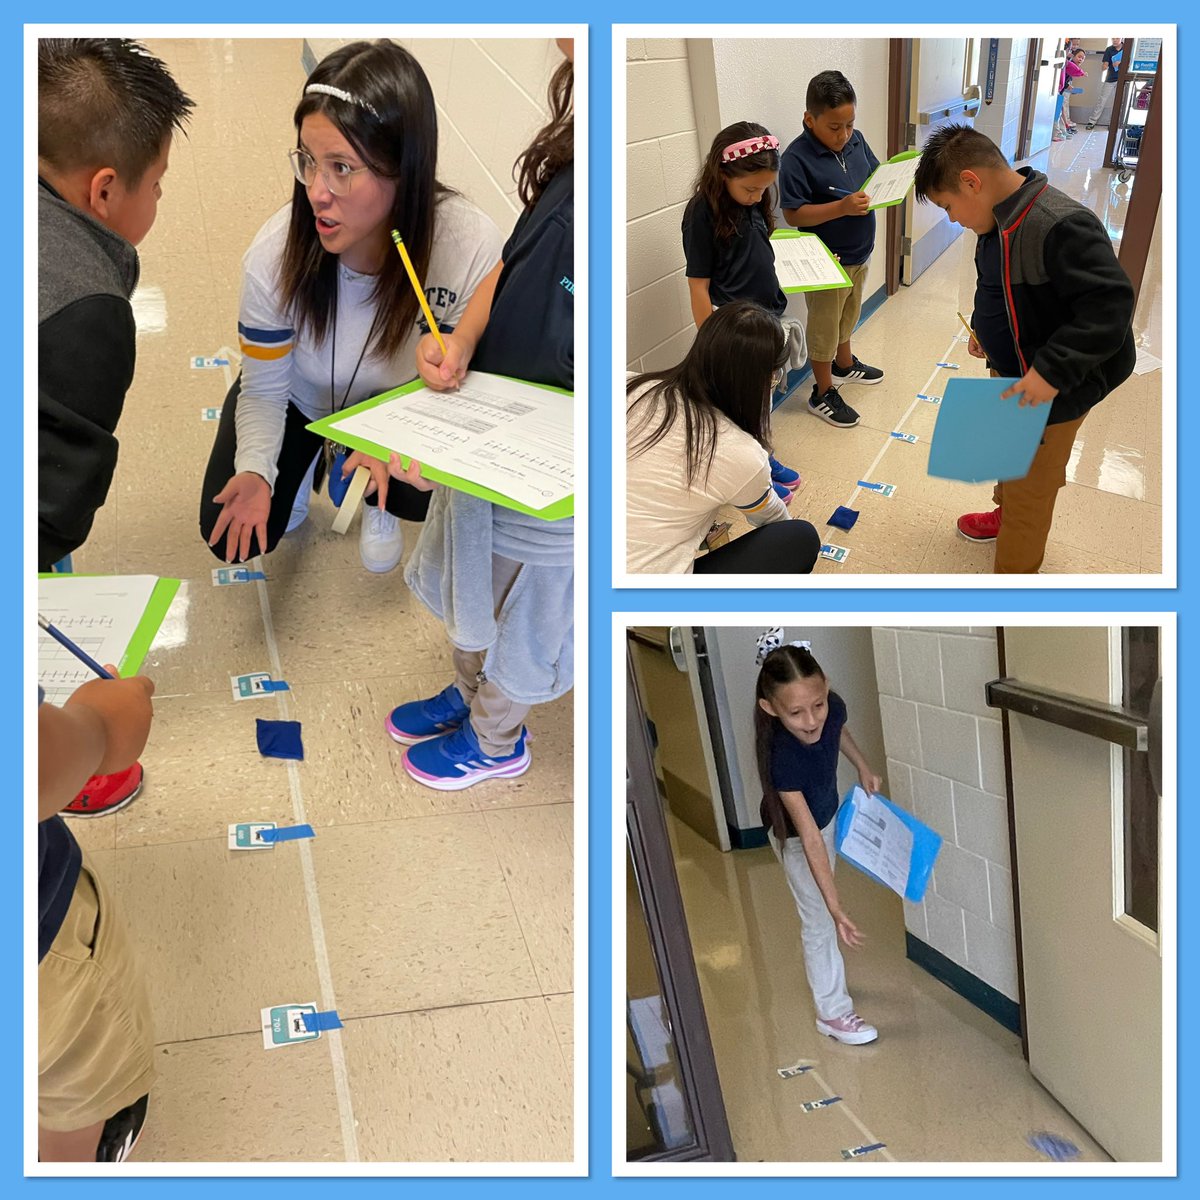 Using STEMscopes to engage 3rd Grade Pirates in rounding numbers to the nearest thousand. #TeamSISD #AnchoredInLearning⚓️💙 #ListosParaAprender